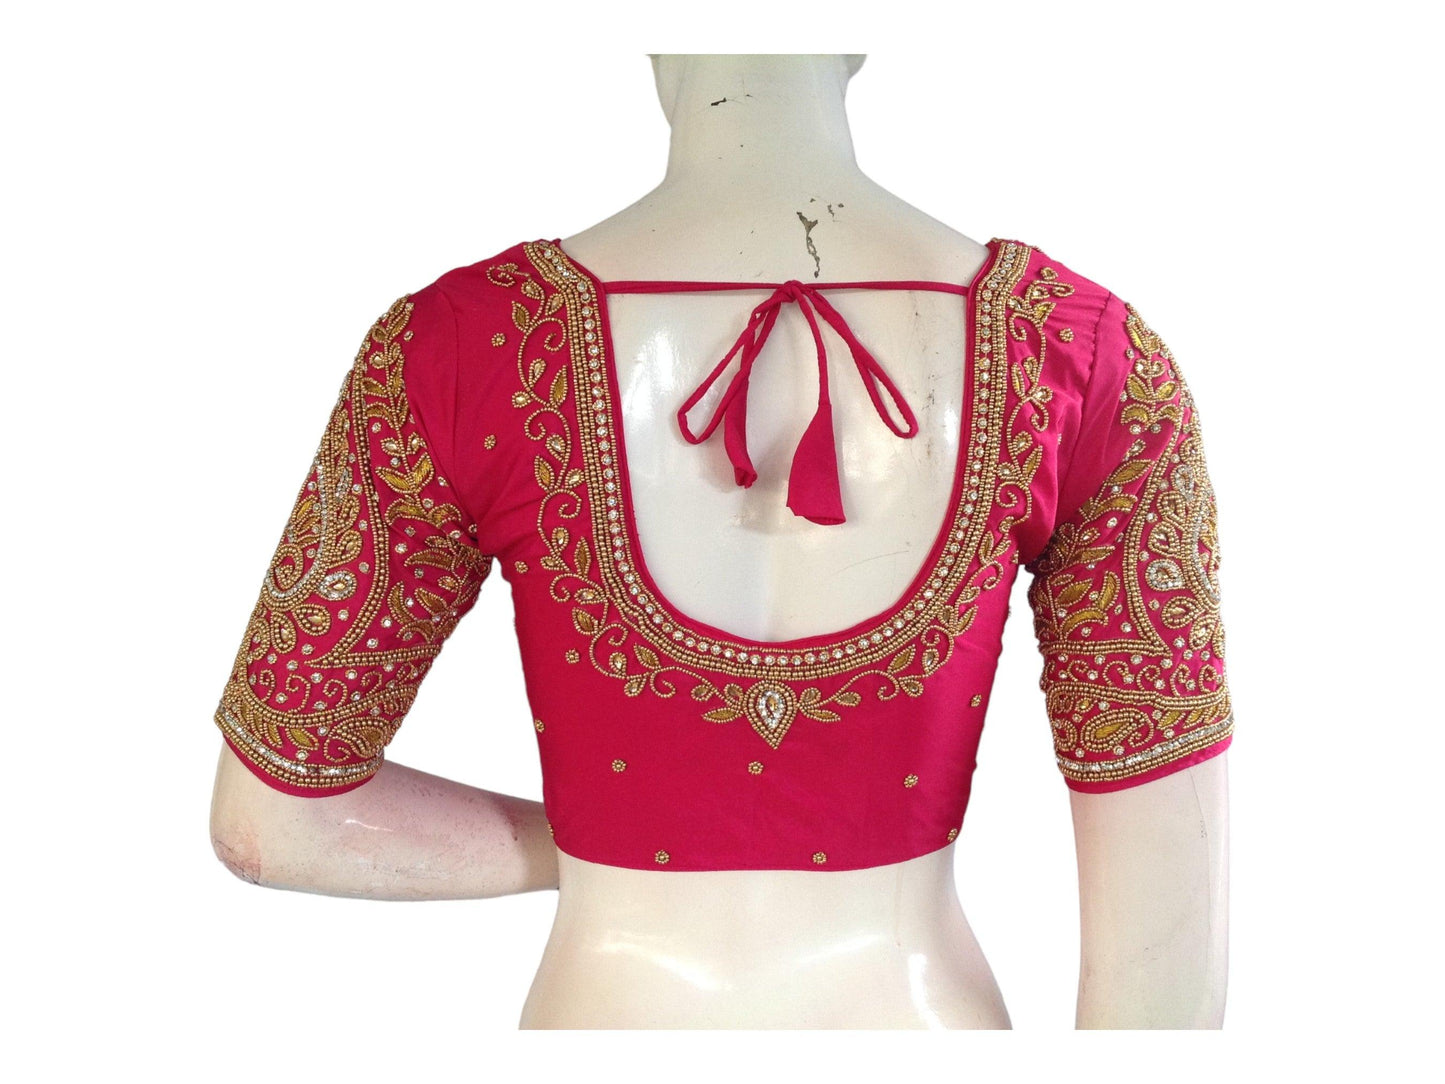 Enhance your bridal look with our elegant Pink Bridal Handwork Readymade Saree Blouse. Perfect for weddings, this blouse adds a touch of tradition and sophistication to your ethnic ensemble. Shop now for the perfect Indian Ethnic Wedding Choli Top.